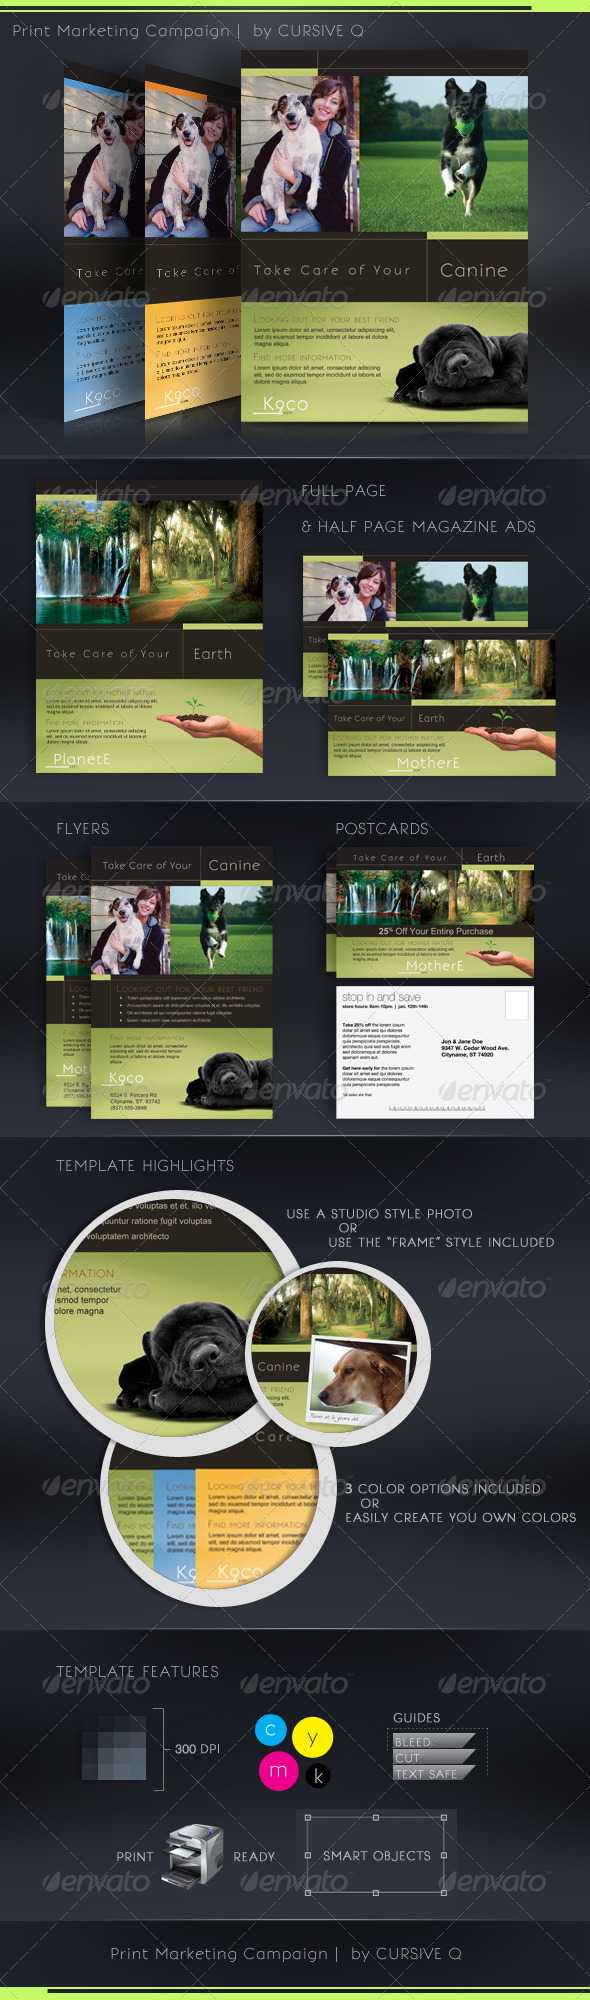 Print Ad Template Graphics, Designs & Templates Within Magazine Ad Template Word